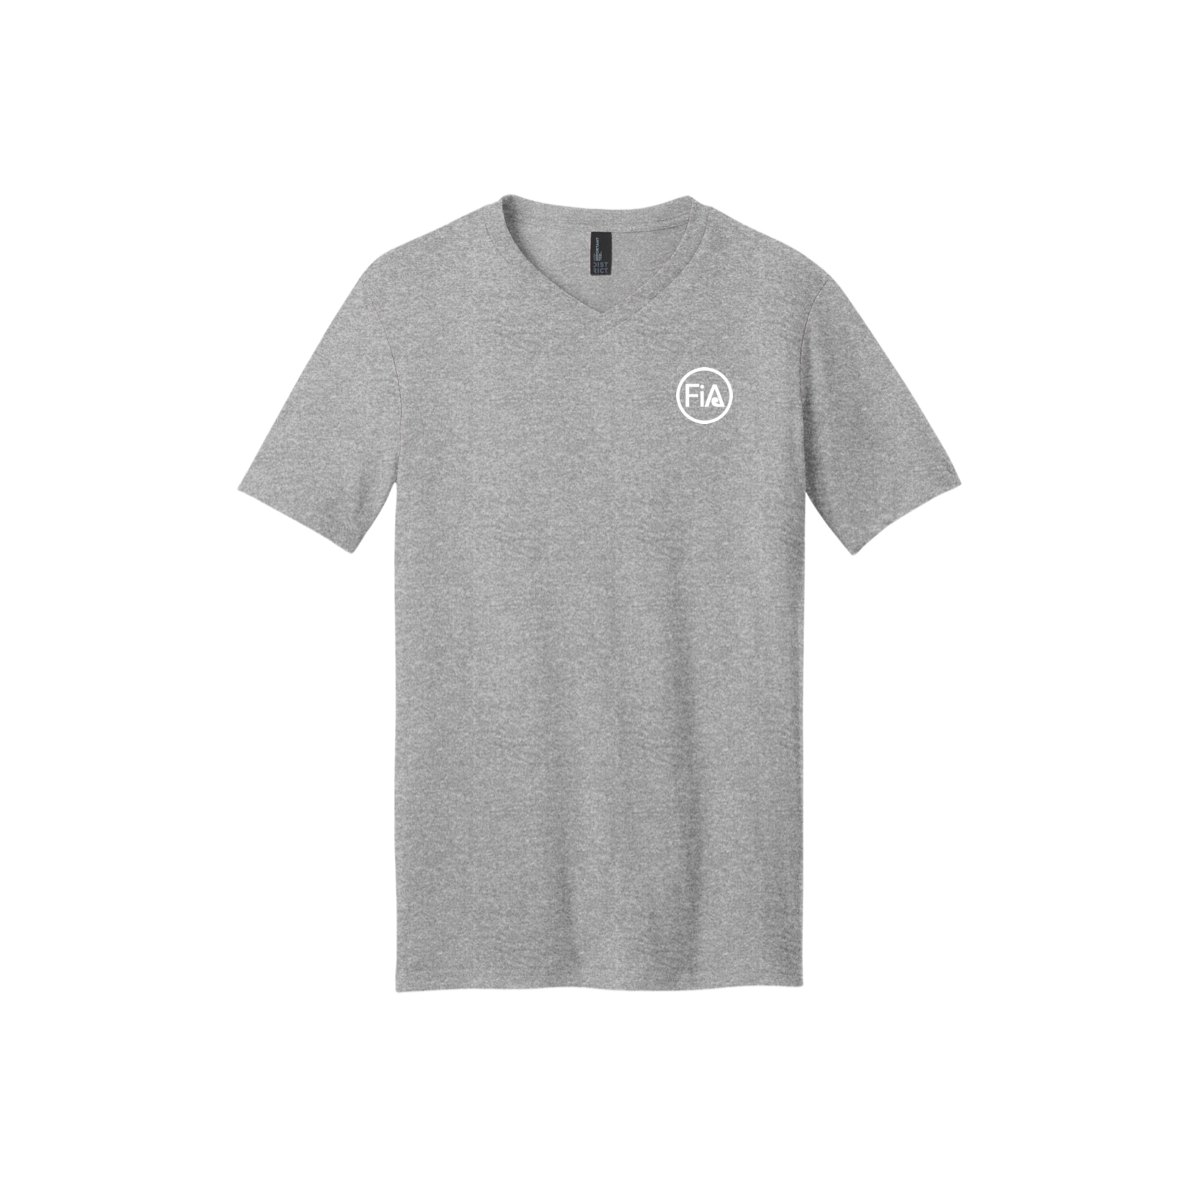 CLEARANCE ITEM - FiA District Very Important Tee V-Neck (Light Heather Grey / Large)